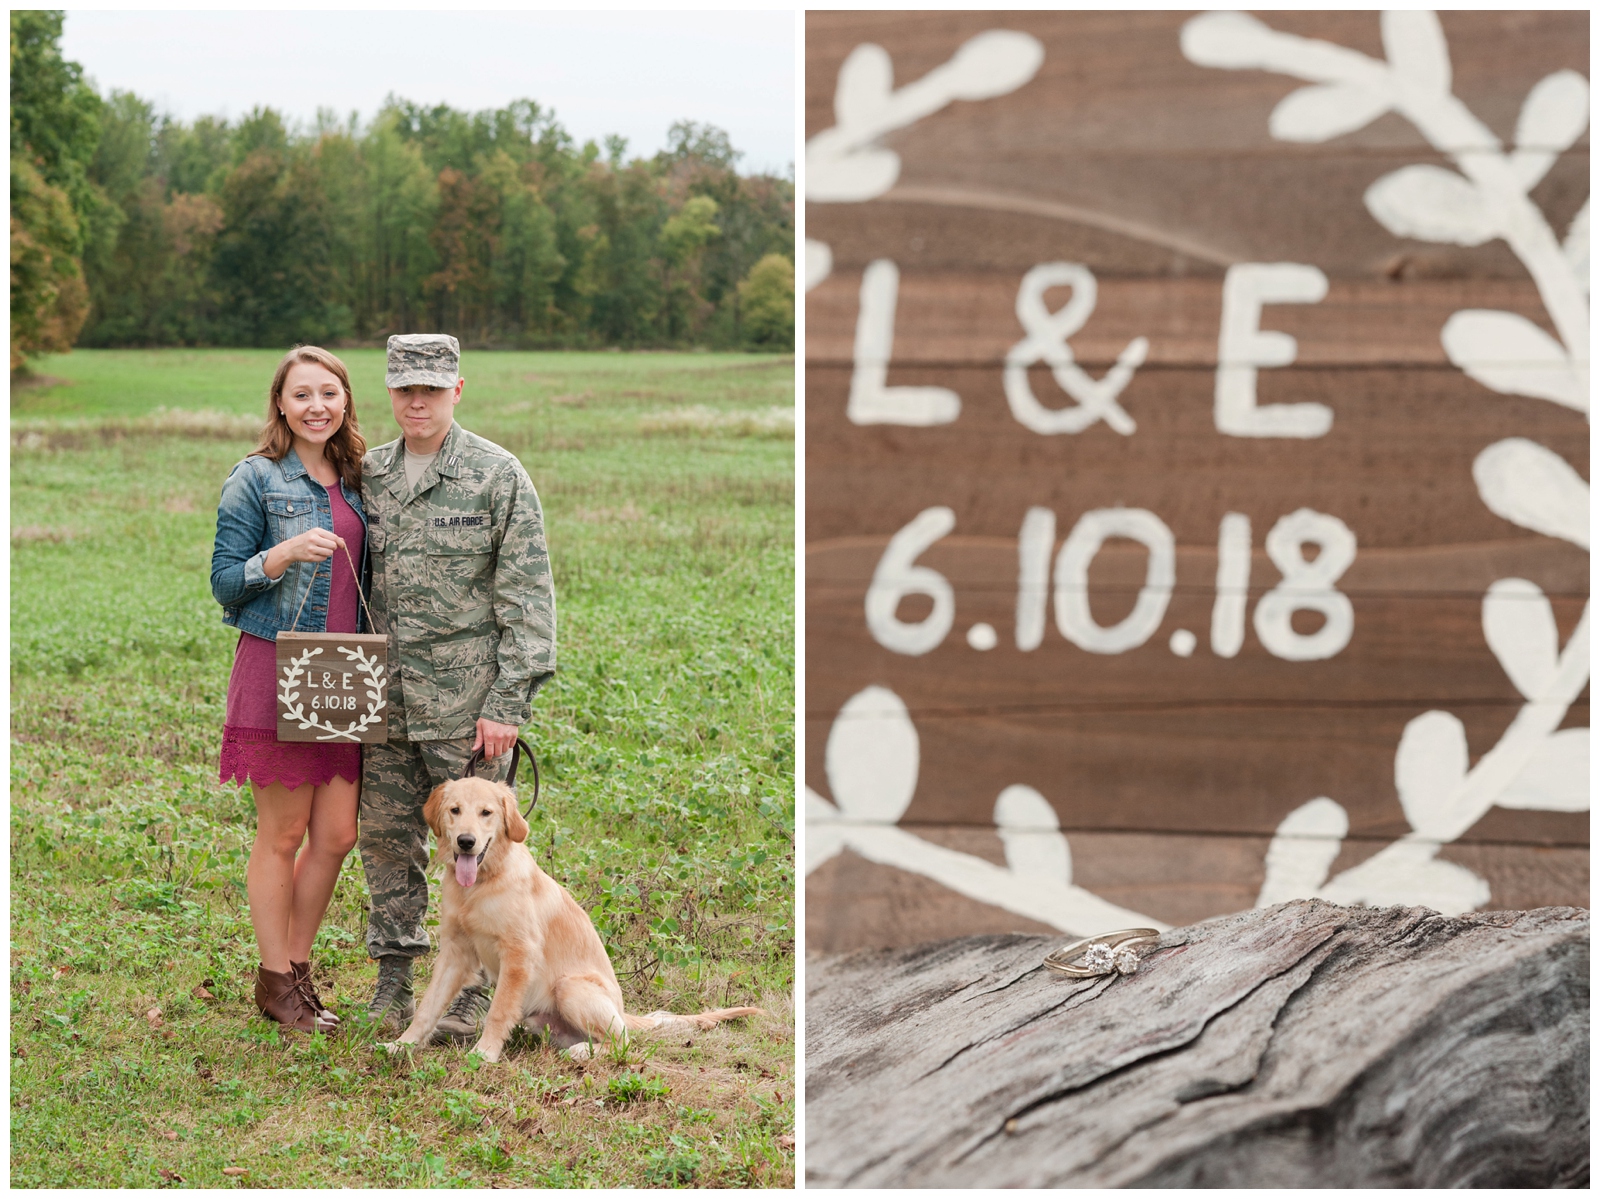 Engaged couple looking at camera in wheat field with burgundy dress and military bdus on in Country Engagement Session Sunbury Ohio with a golden retriever dog and ring image